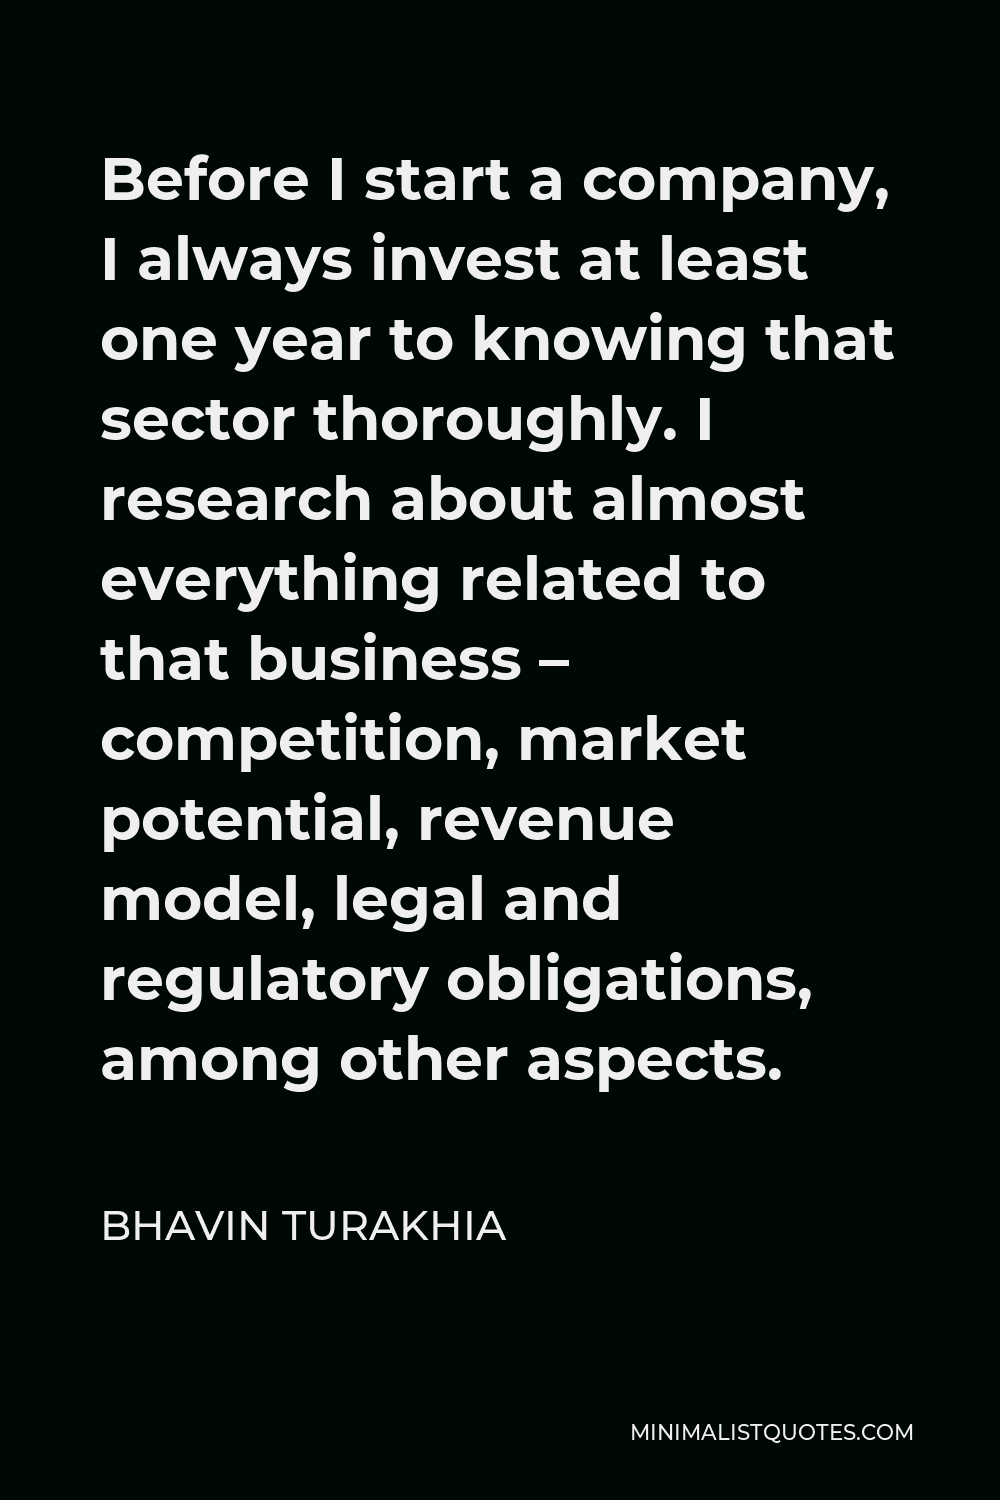 Bhavin Turakhia Quote - Before I start a company, I always invest at least one year to knowing that sector thoroughly. I research about almost everything related to that business – competition, market potential, revenue model, legal and regulatory obligations, among other aspects.